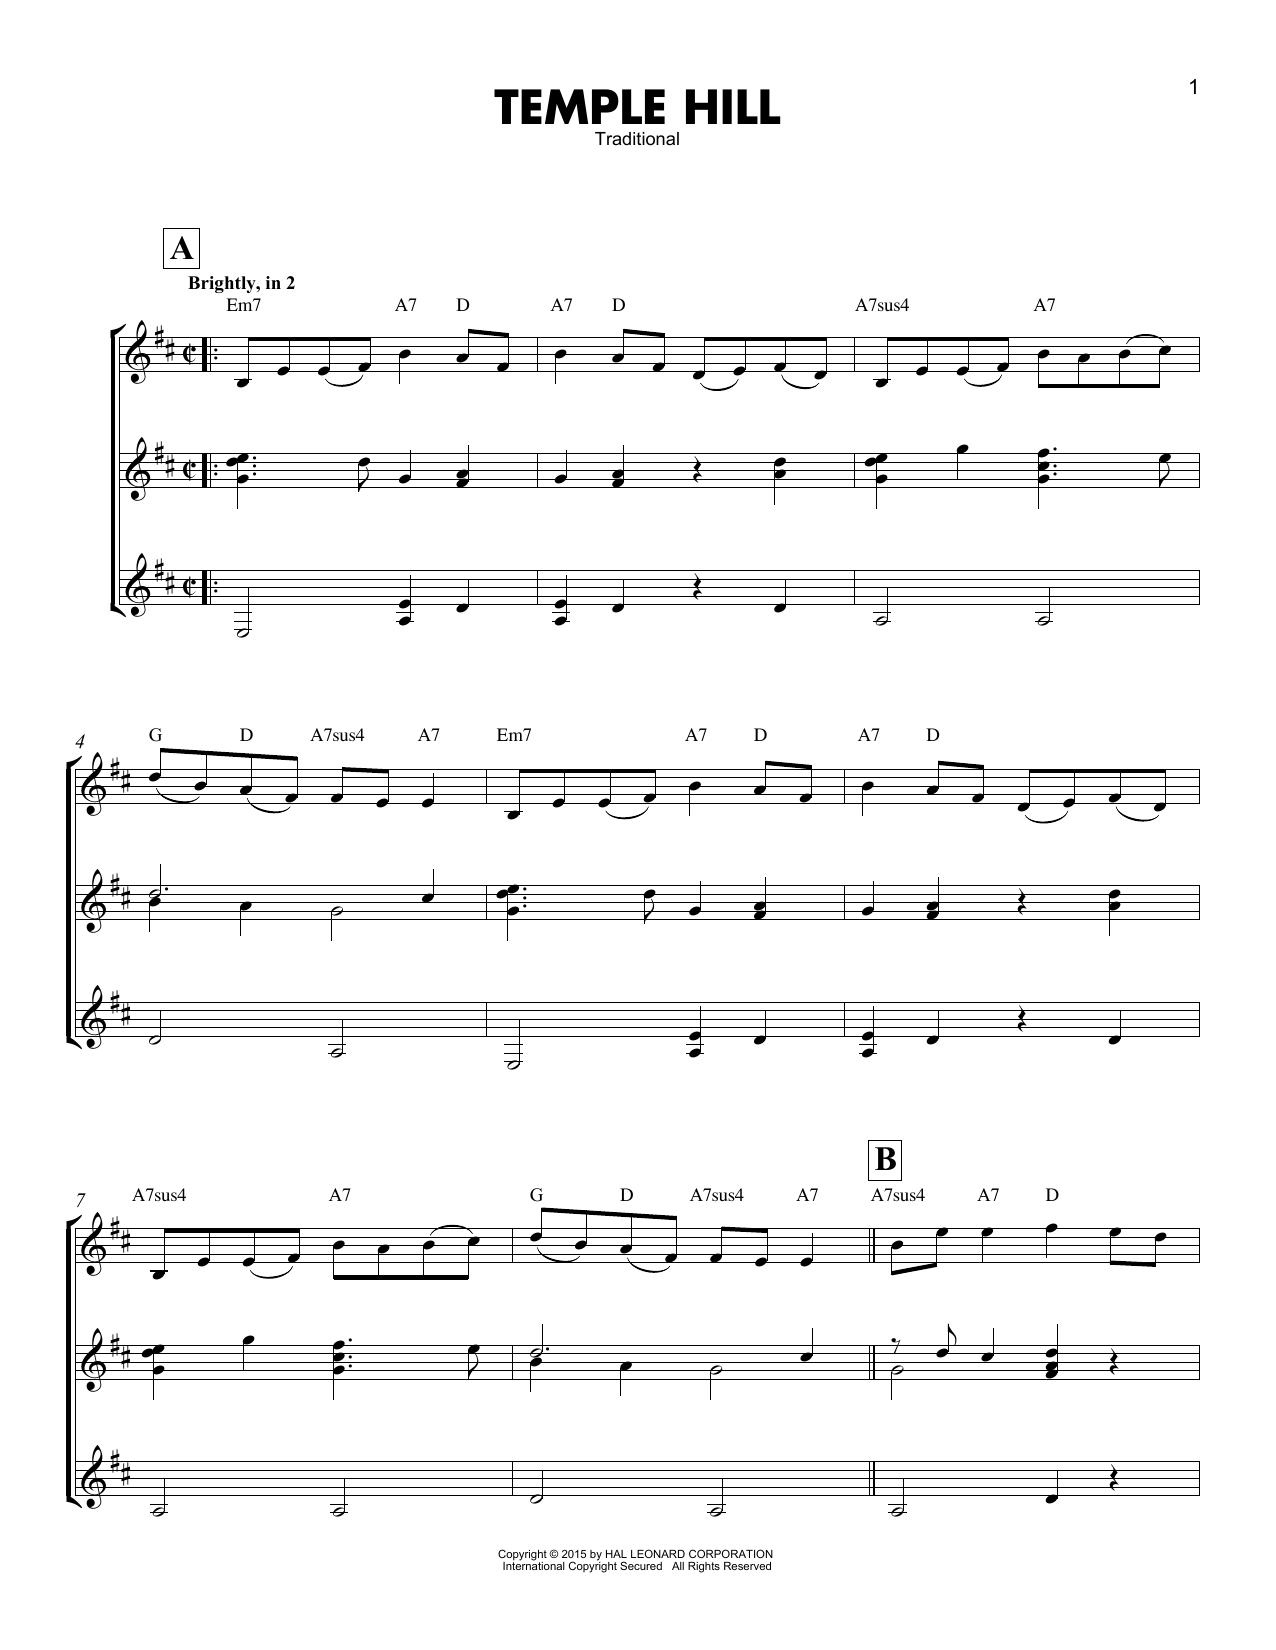 Download Traditional Temple Hill Sheet Music